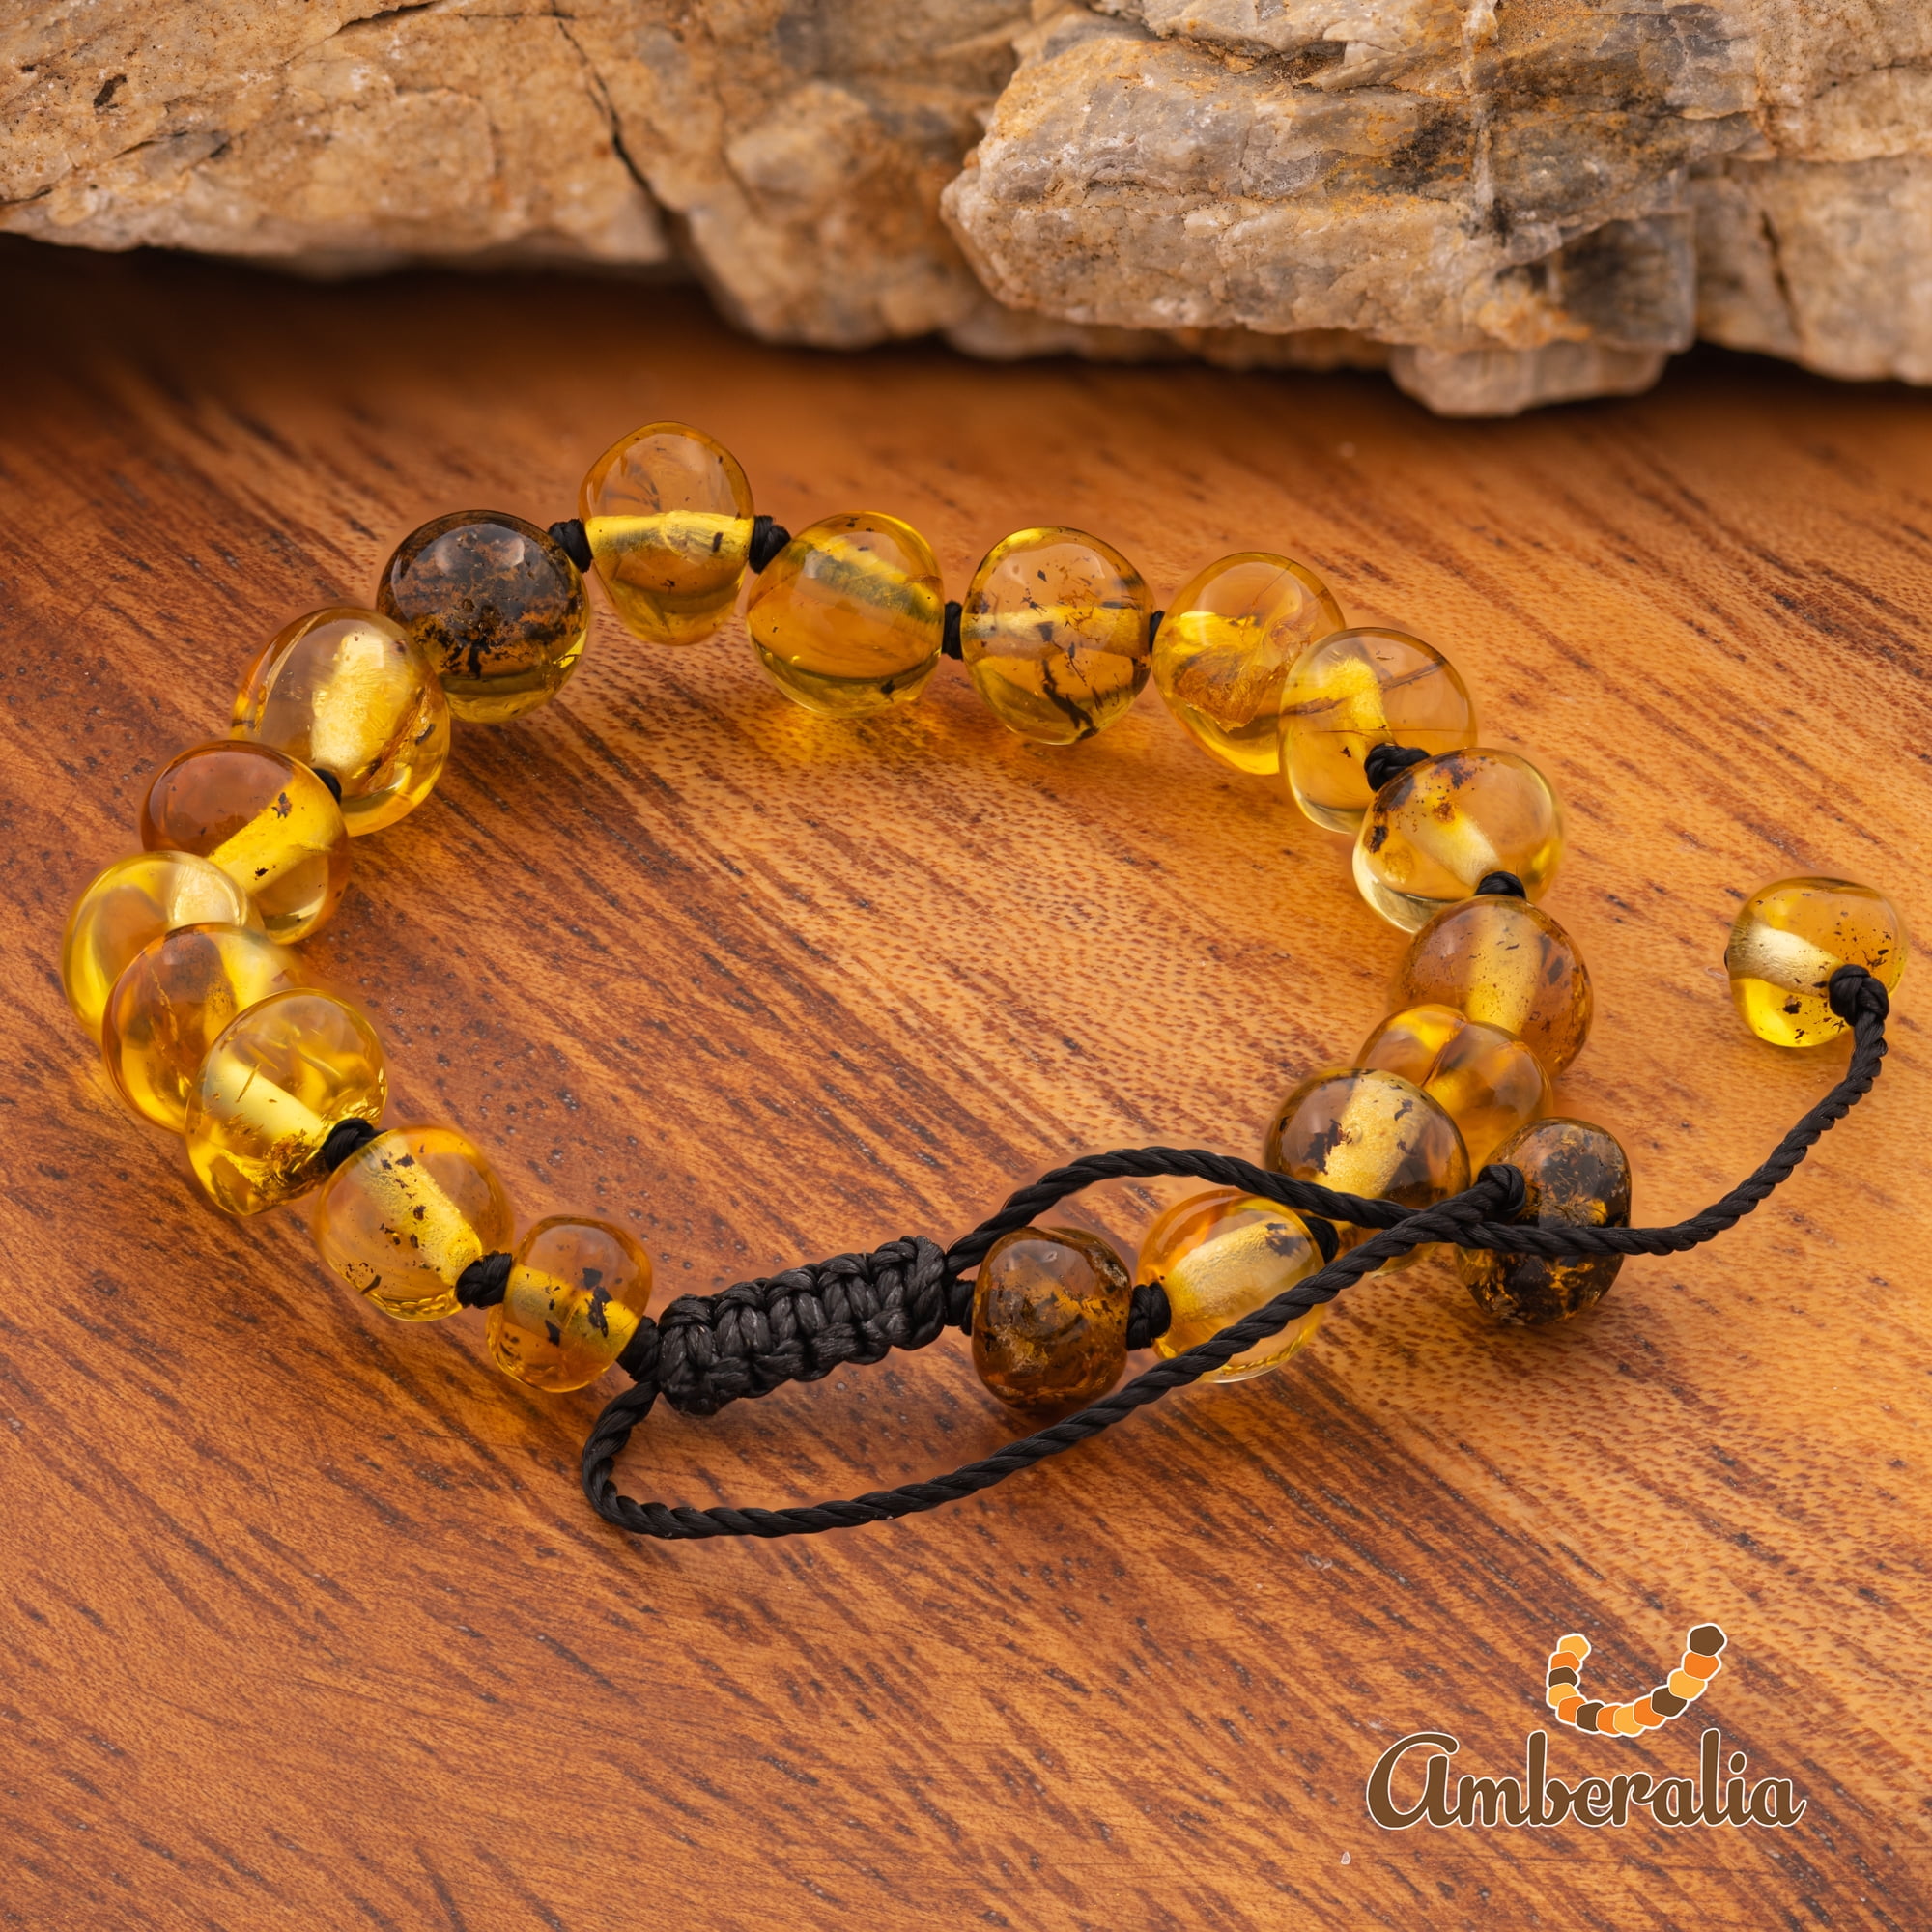 Amber Necklaces for Children with ADHD & Autism - The natural amber